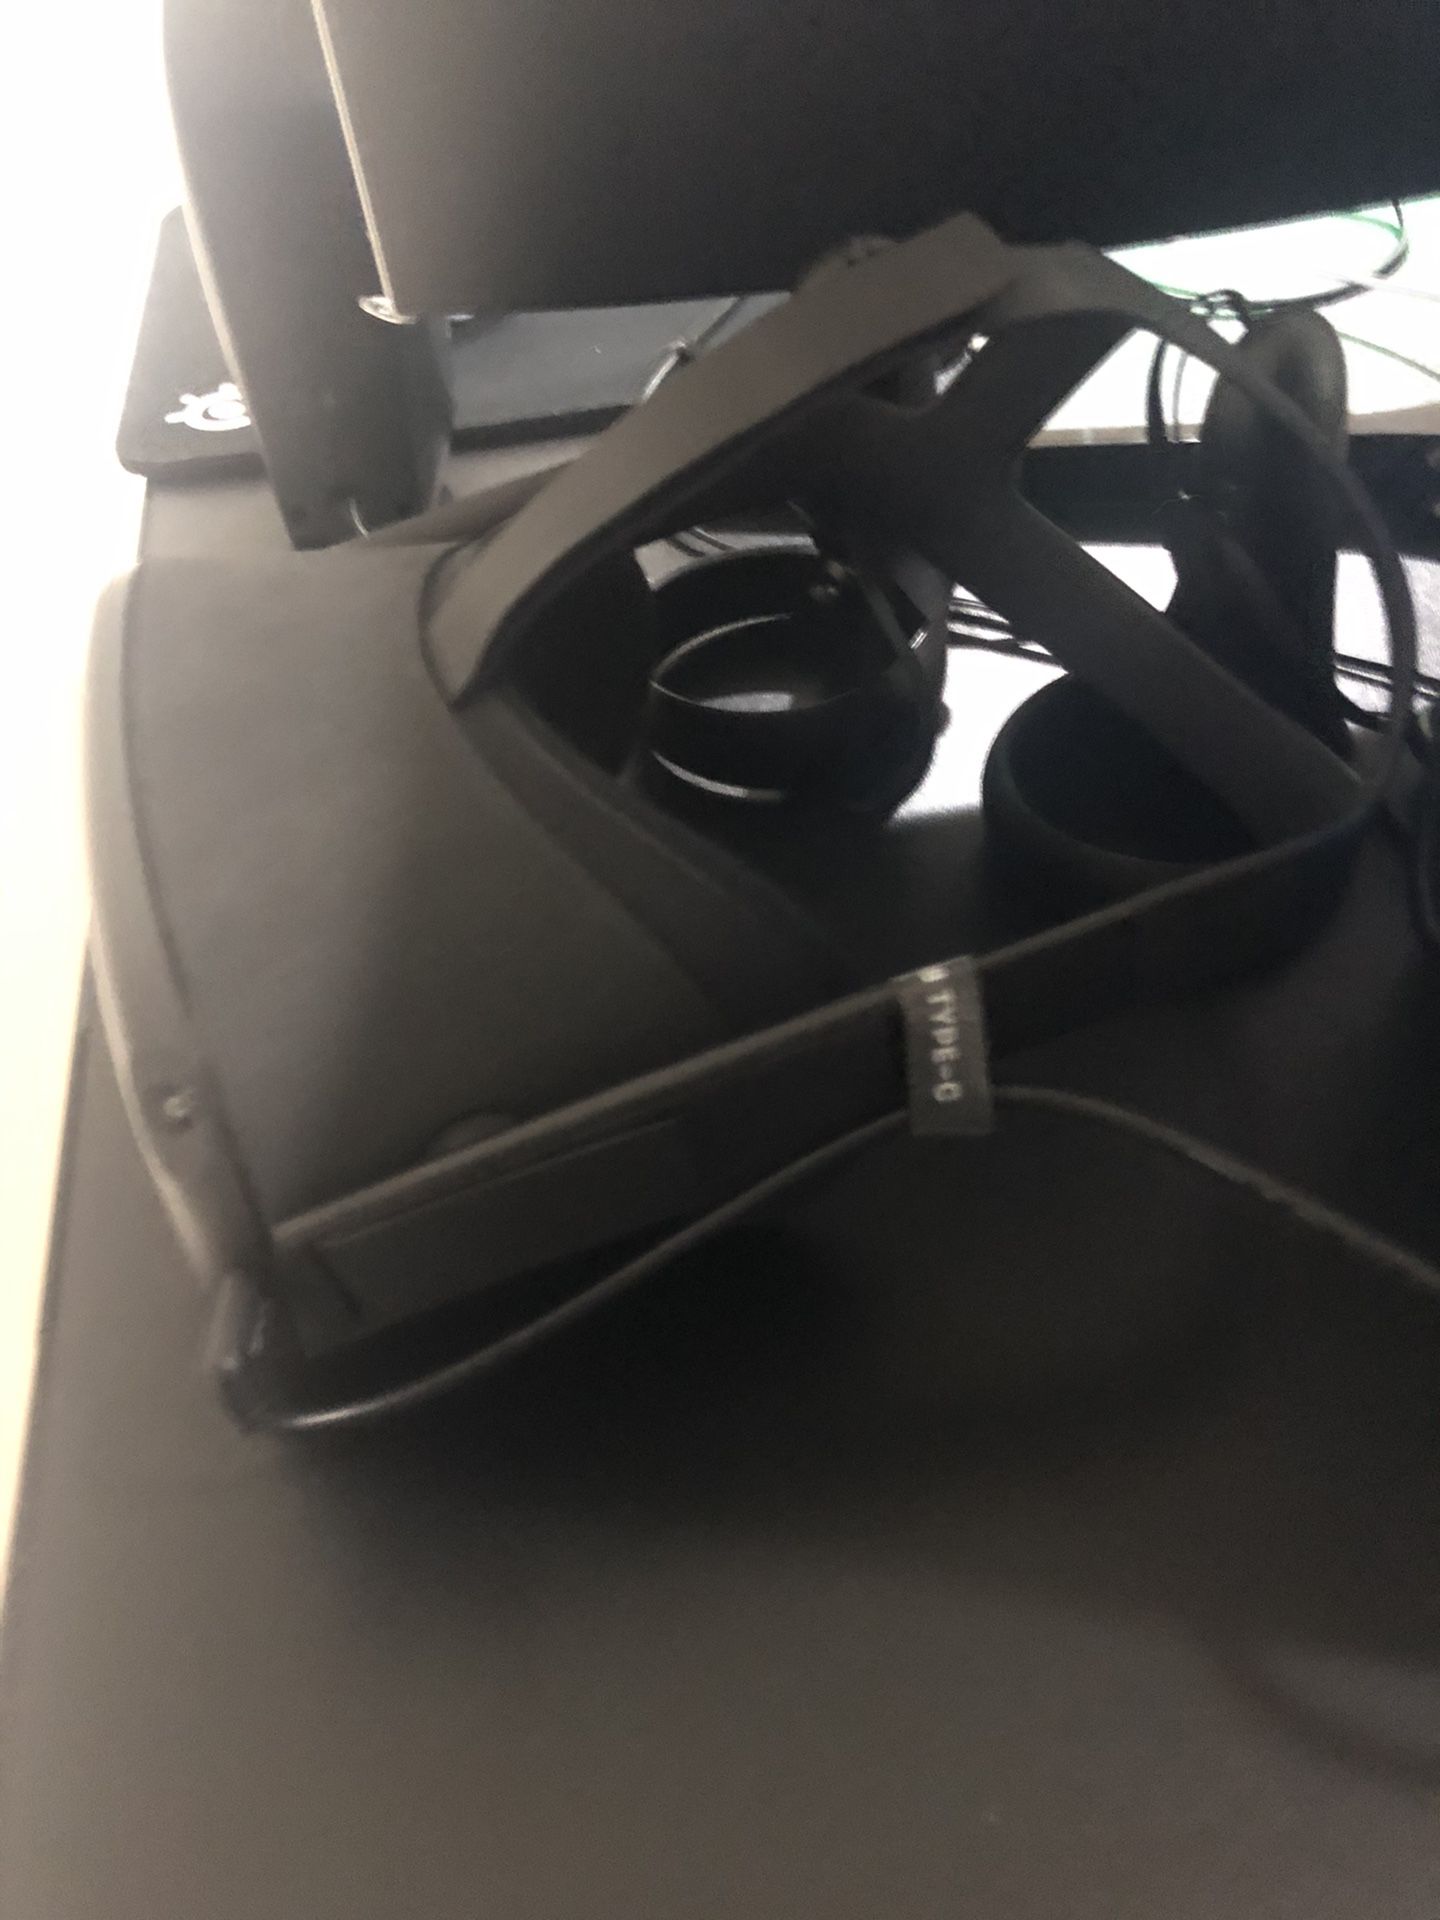 Oculus Quest with box